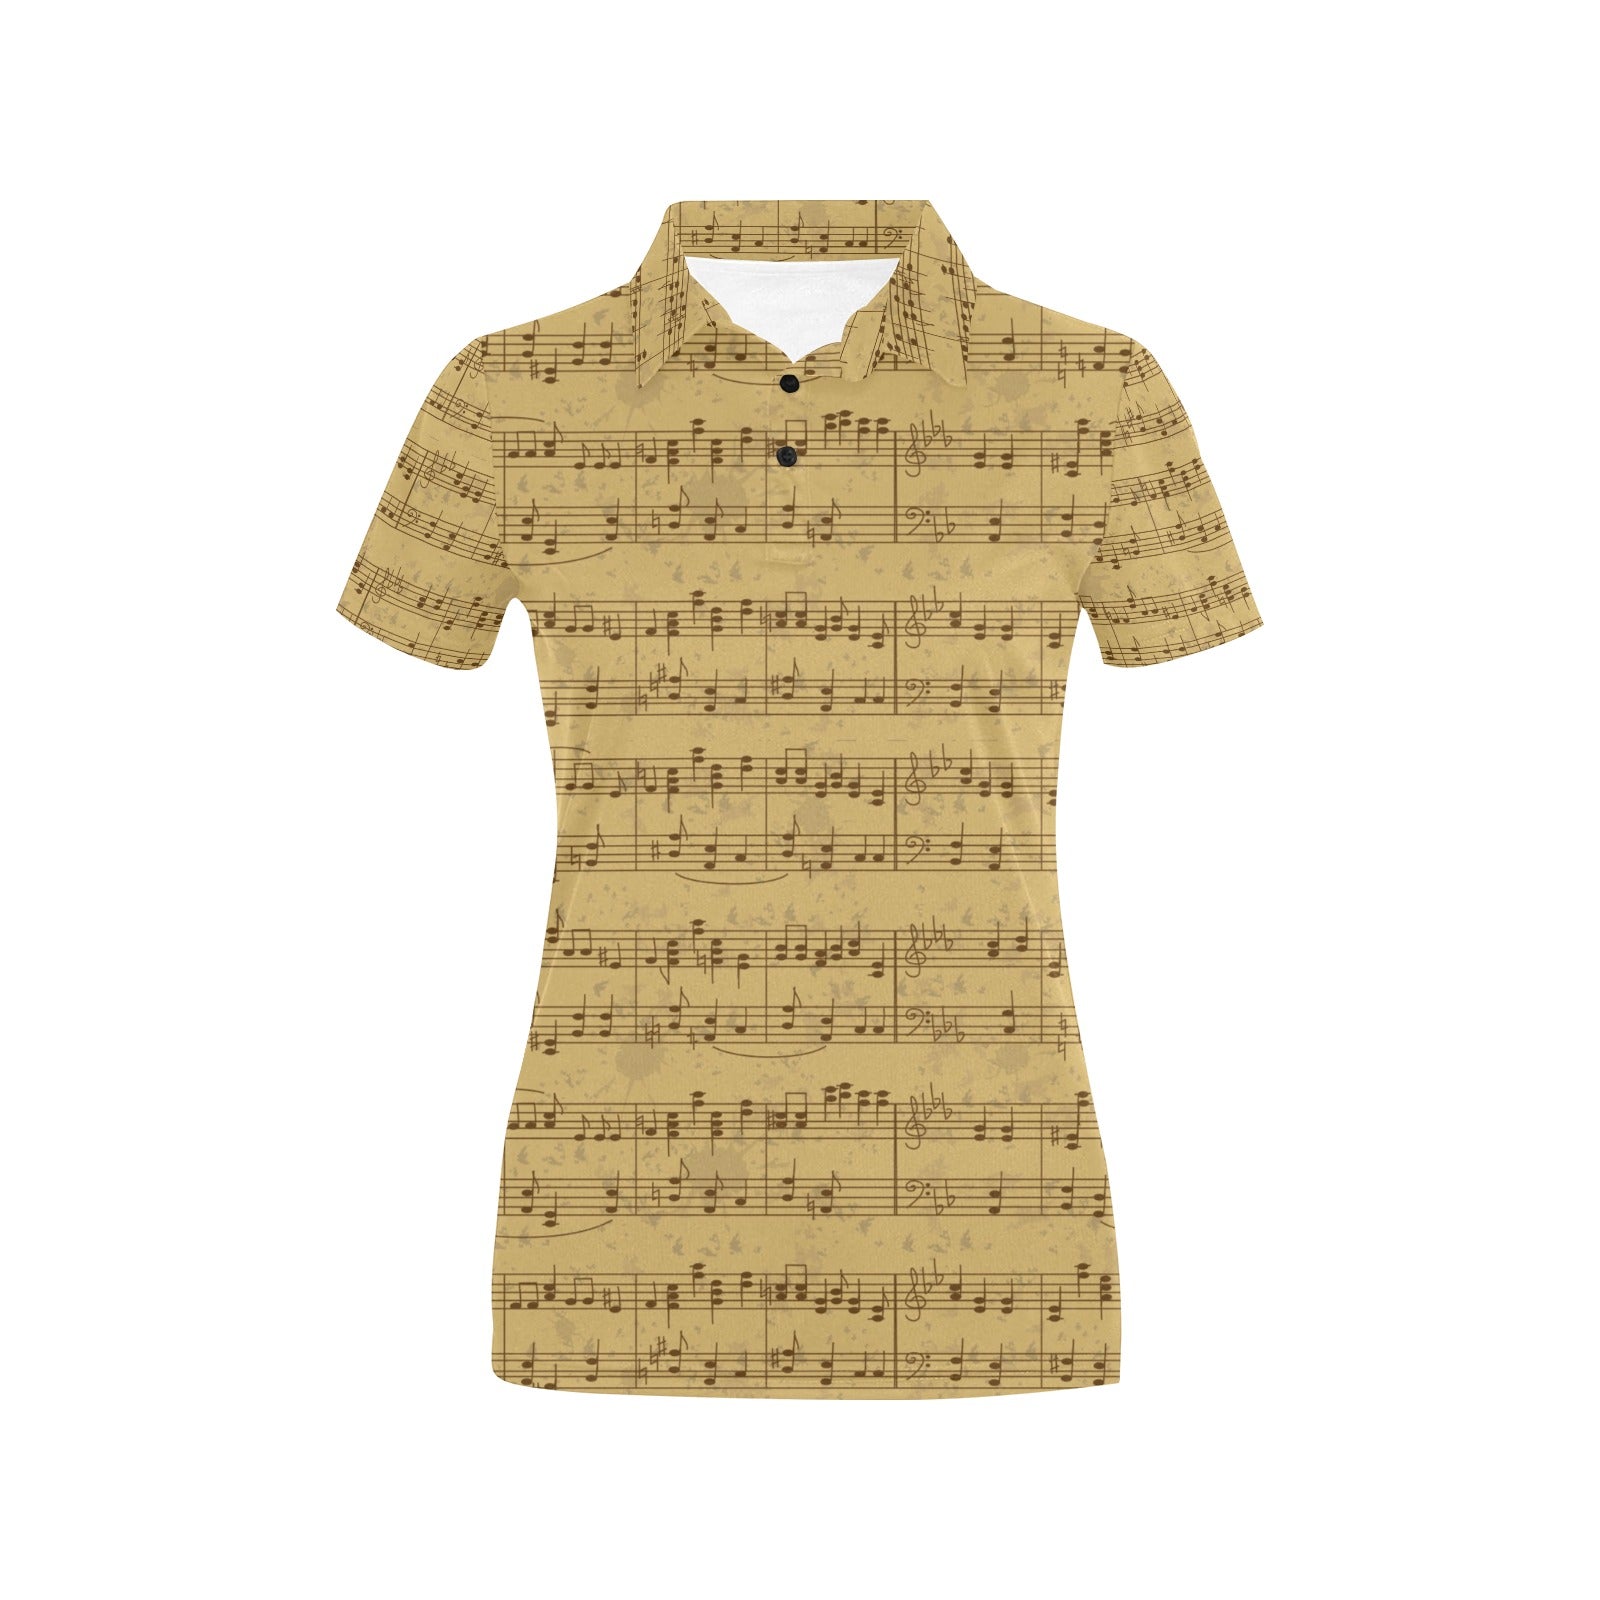 Music Note Vintage Themed Print Women's Polo Shirt